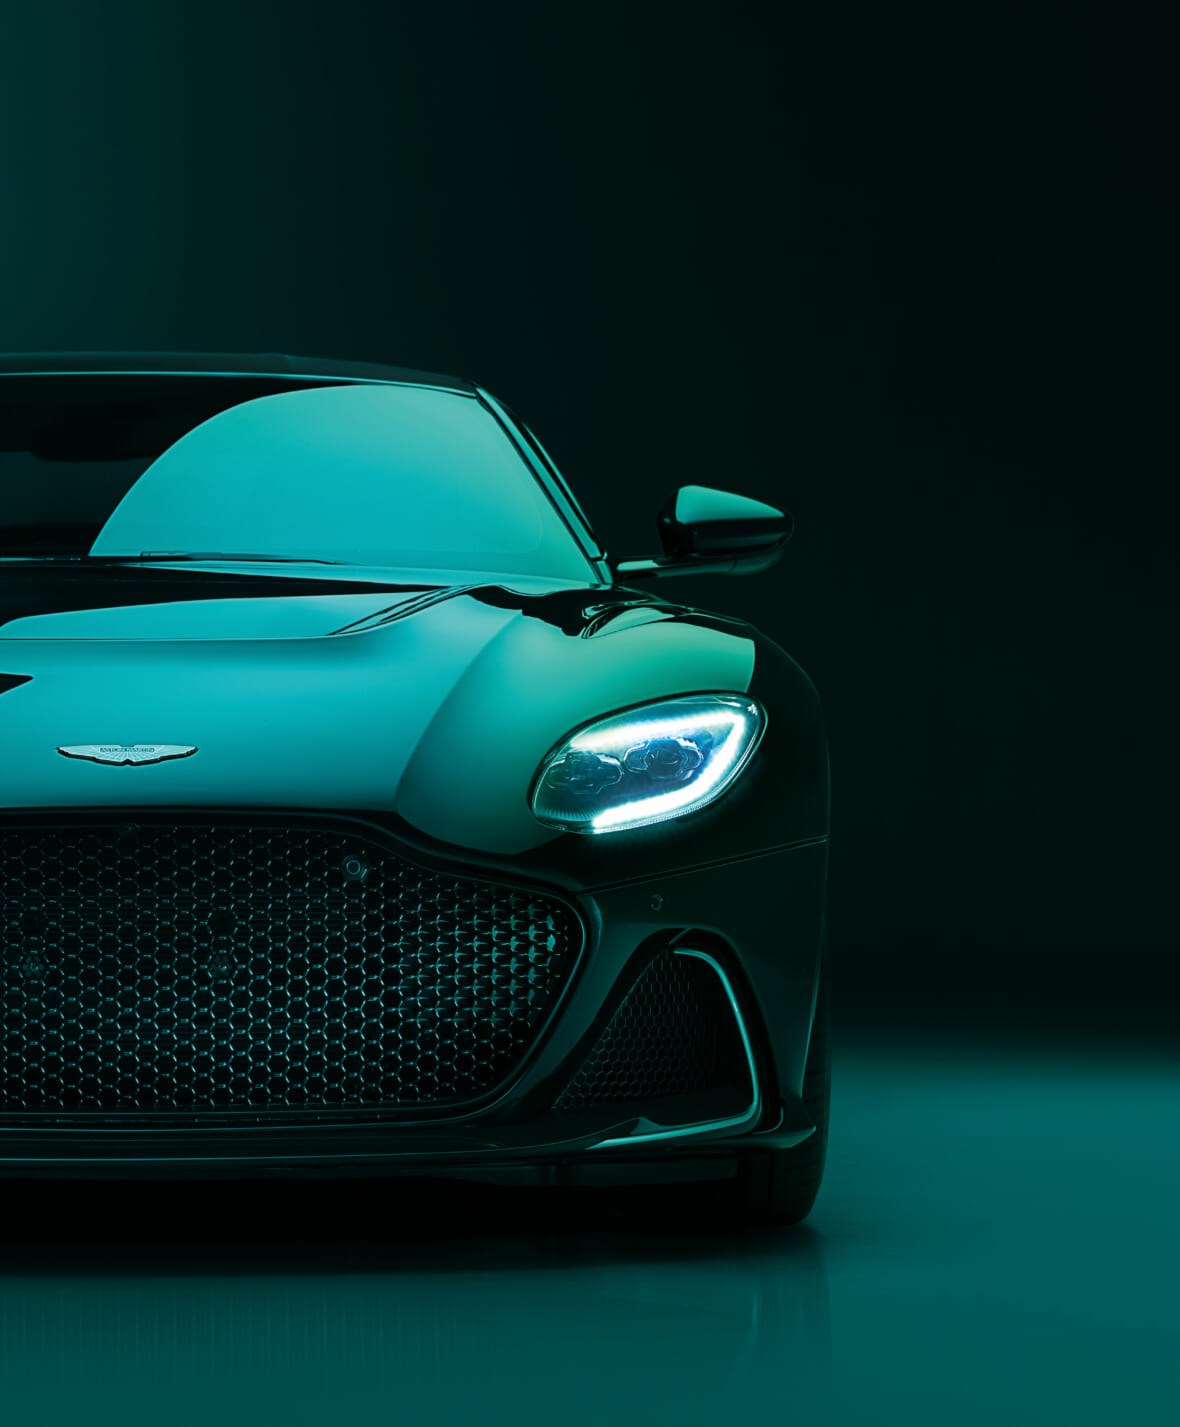 DBS 770 Ultimate 06 Aston Martin Bids Farewell To Flagship GT With Most Powerful